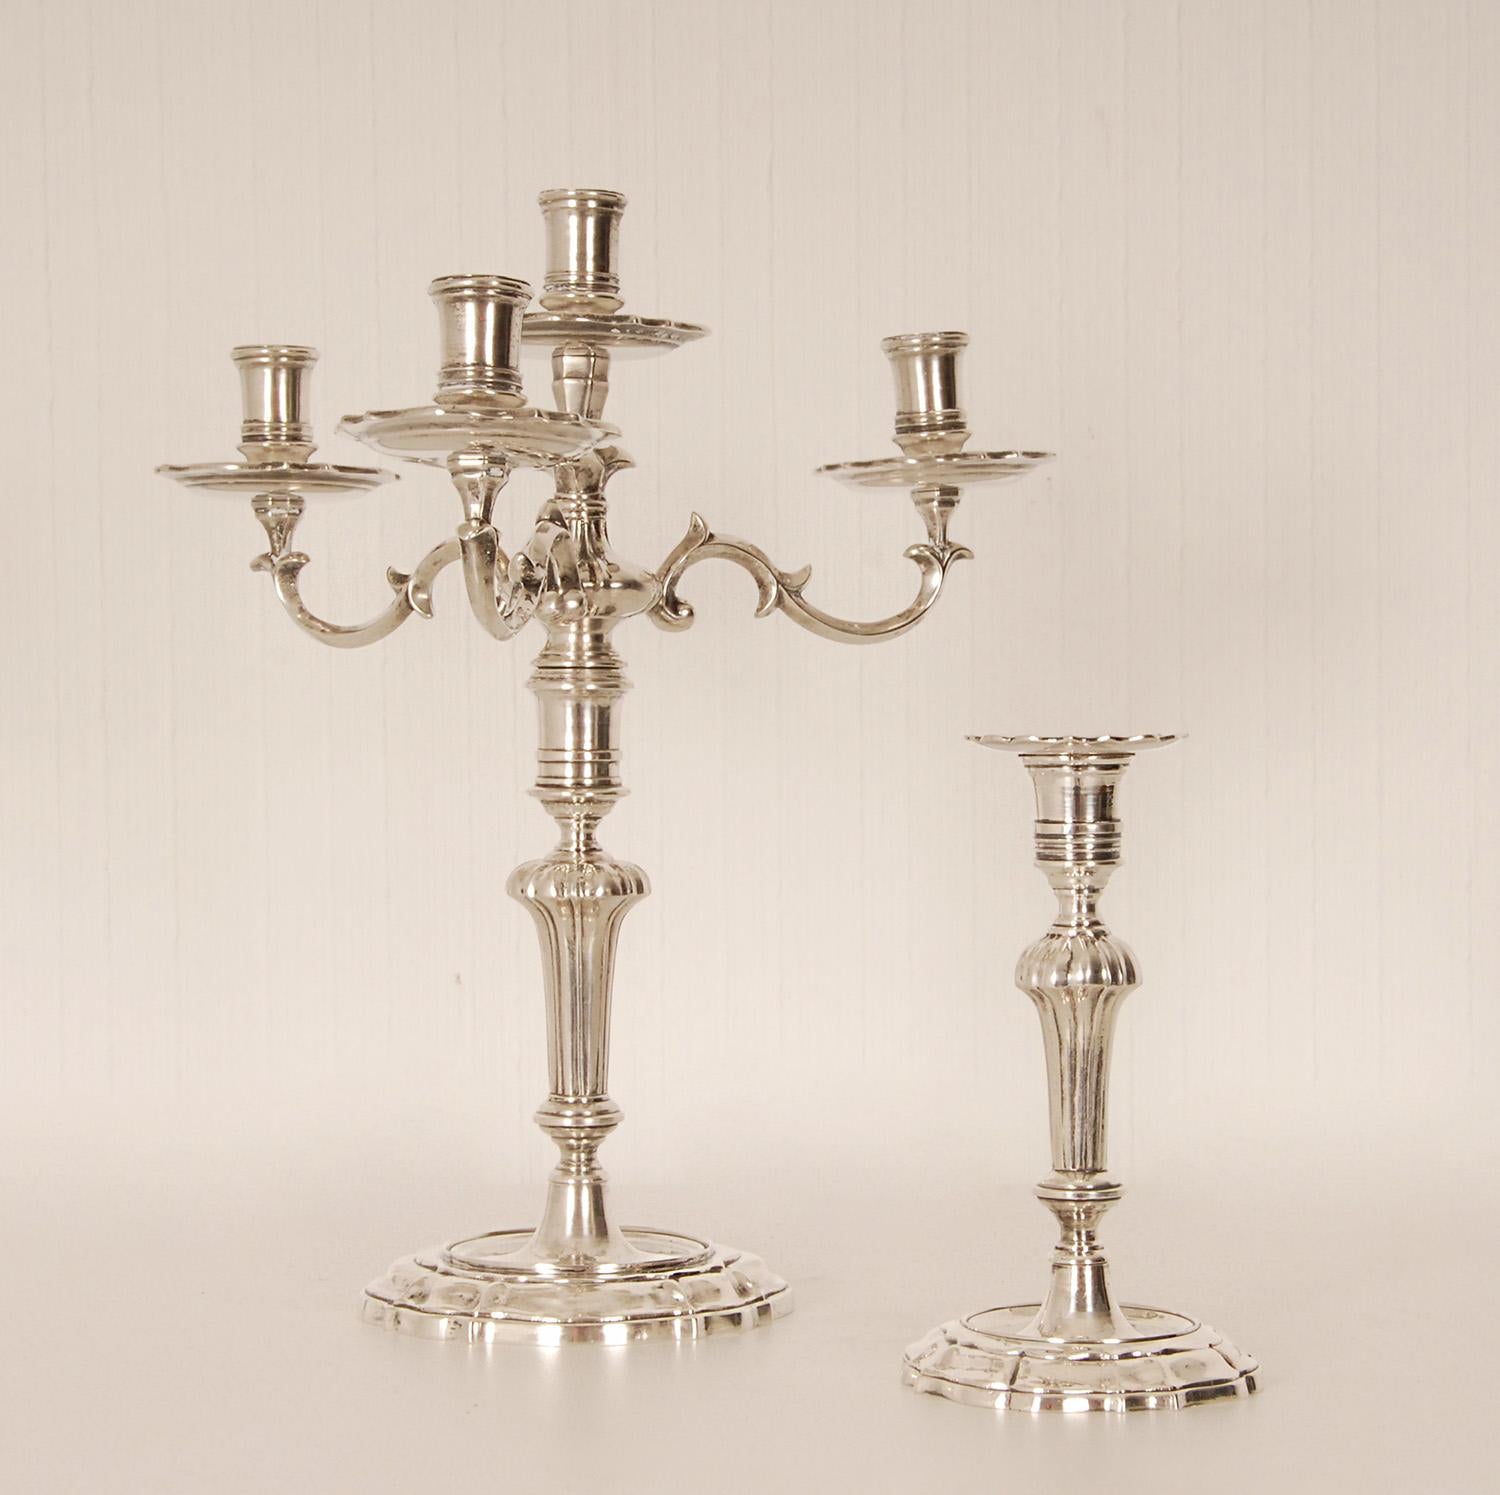 18th Century Italian Candelabra Rococo Sterling Silver Candlesticks Venice pair For Sale 11